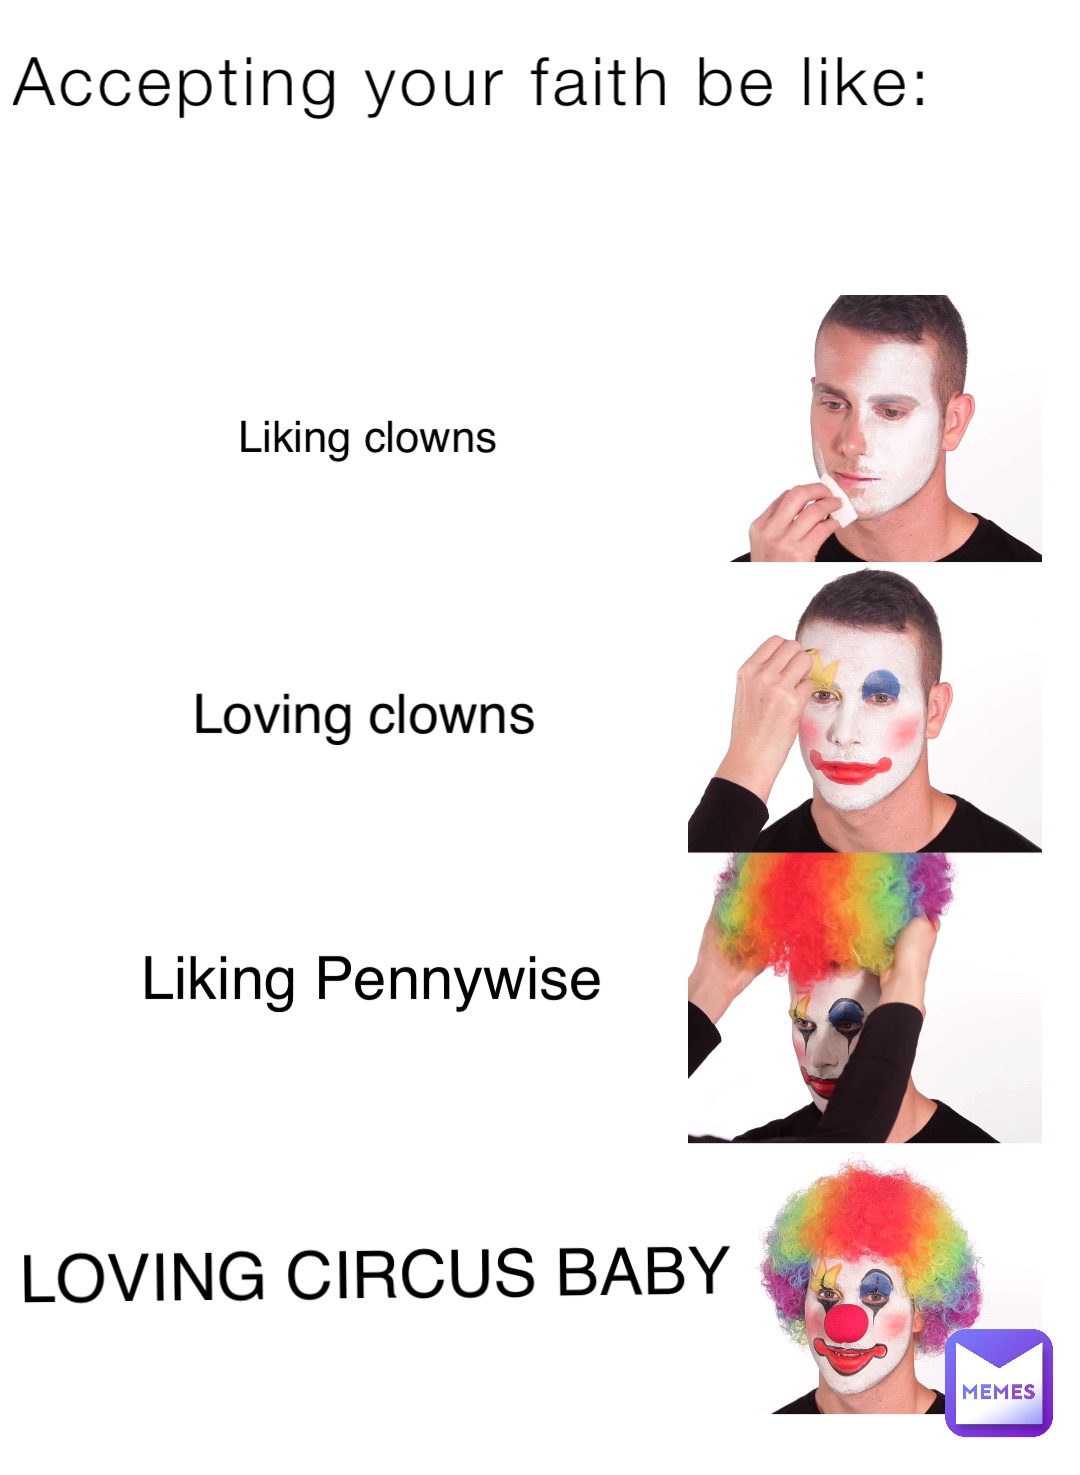 Accepting your faith be like: Liking clowns Loving clowns Liking Pennywise LOVING CIRCUS BABY